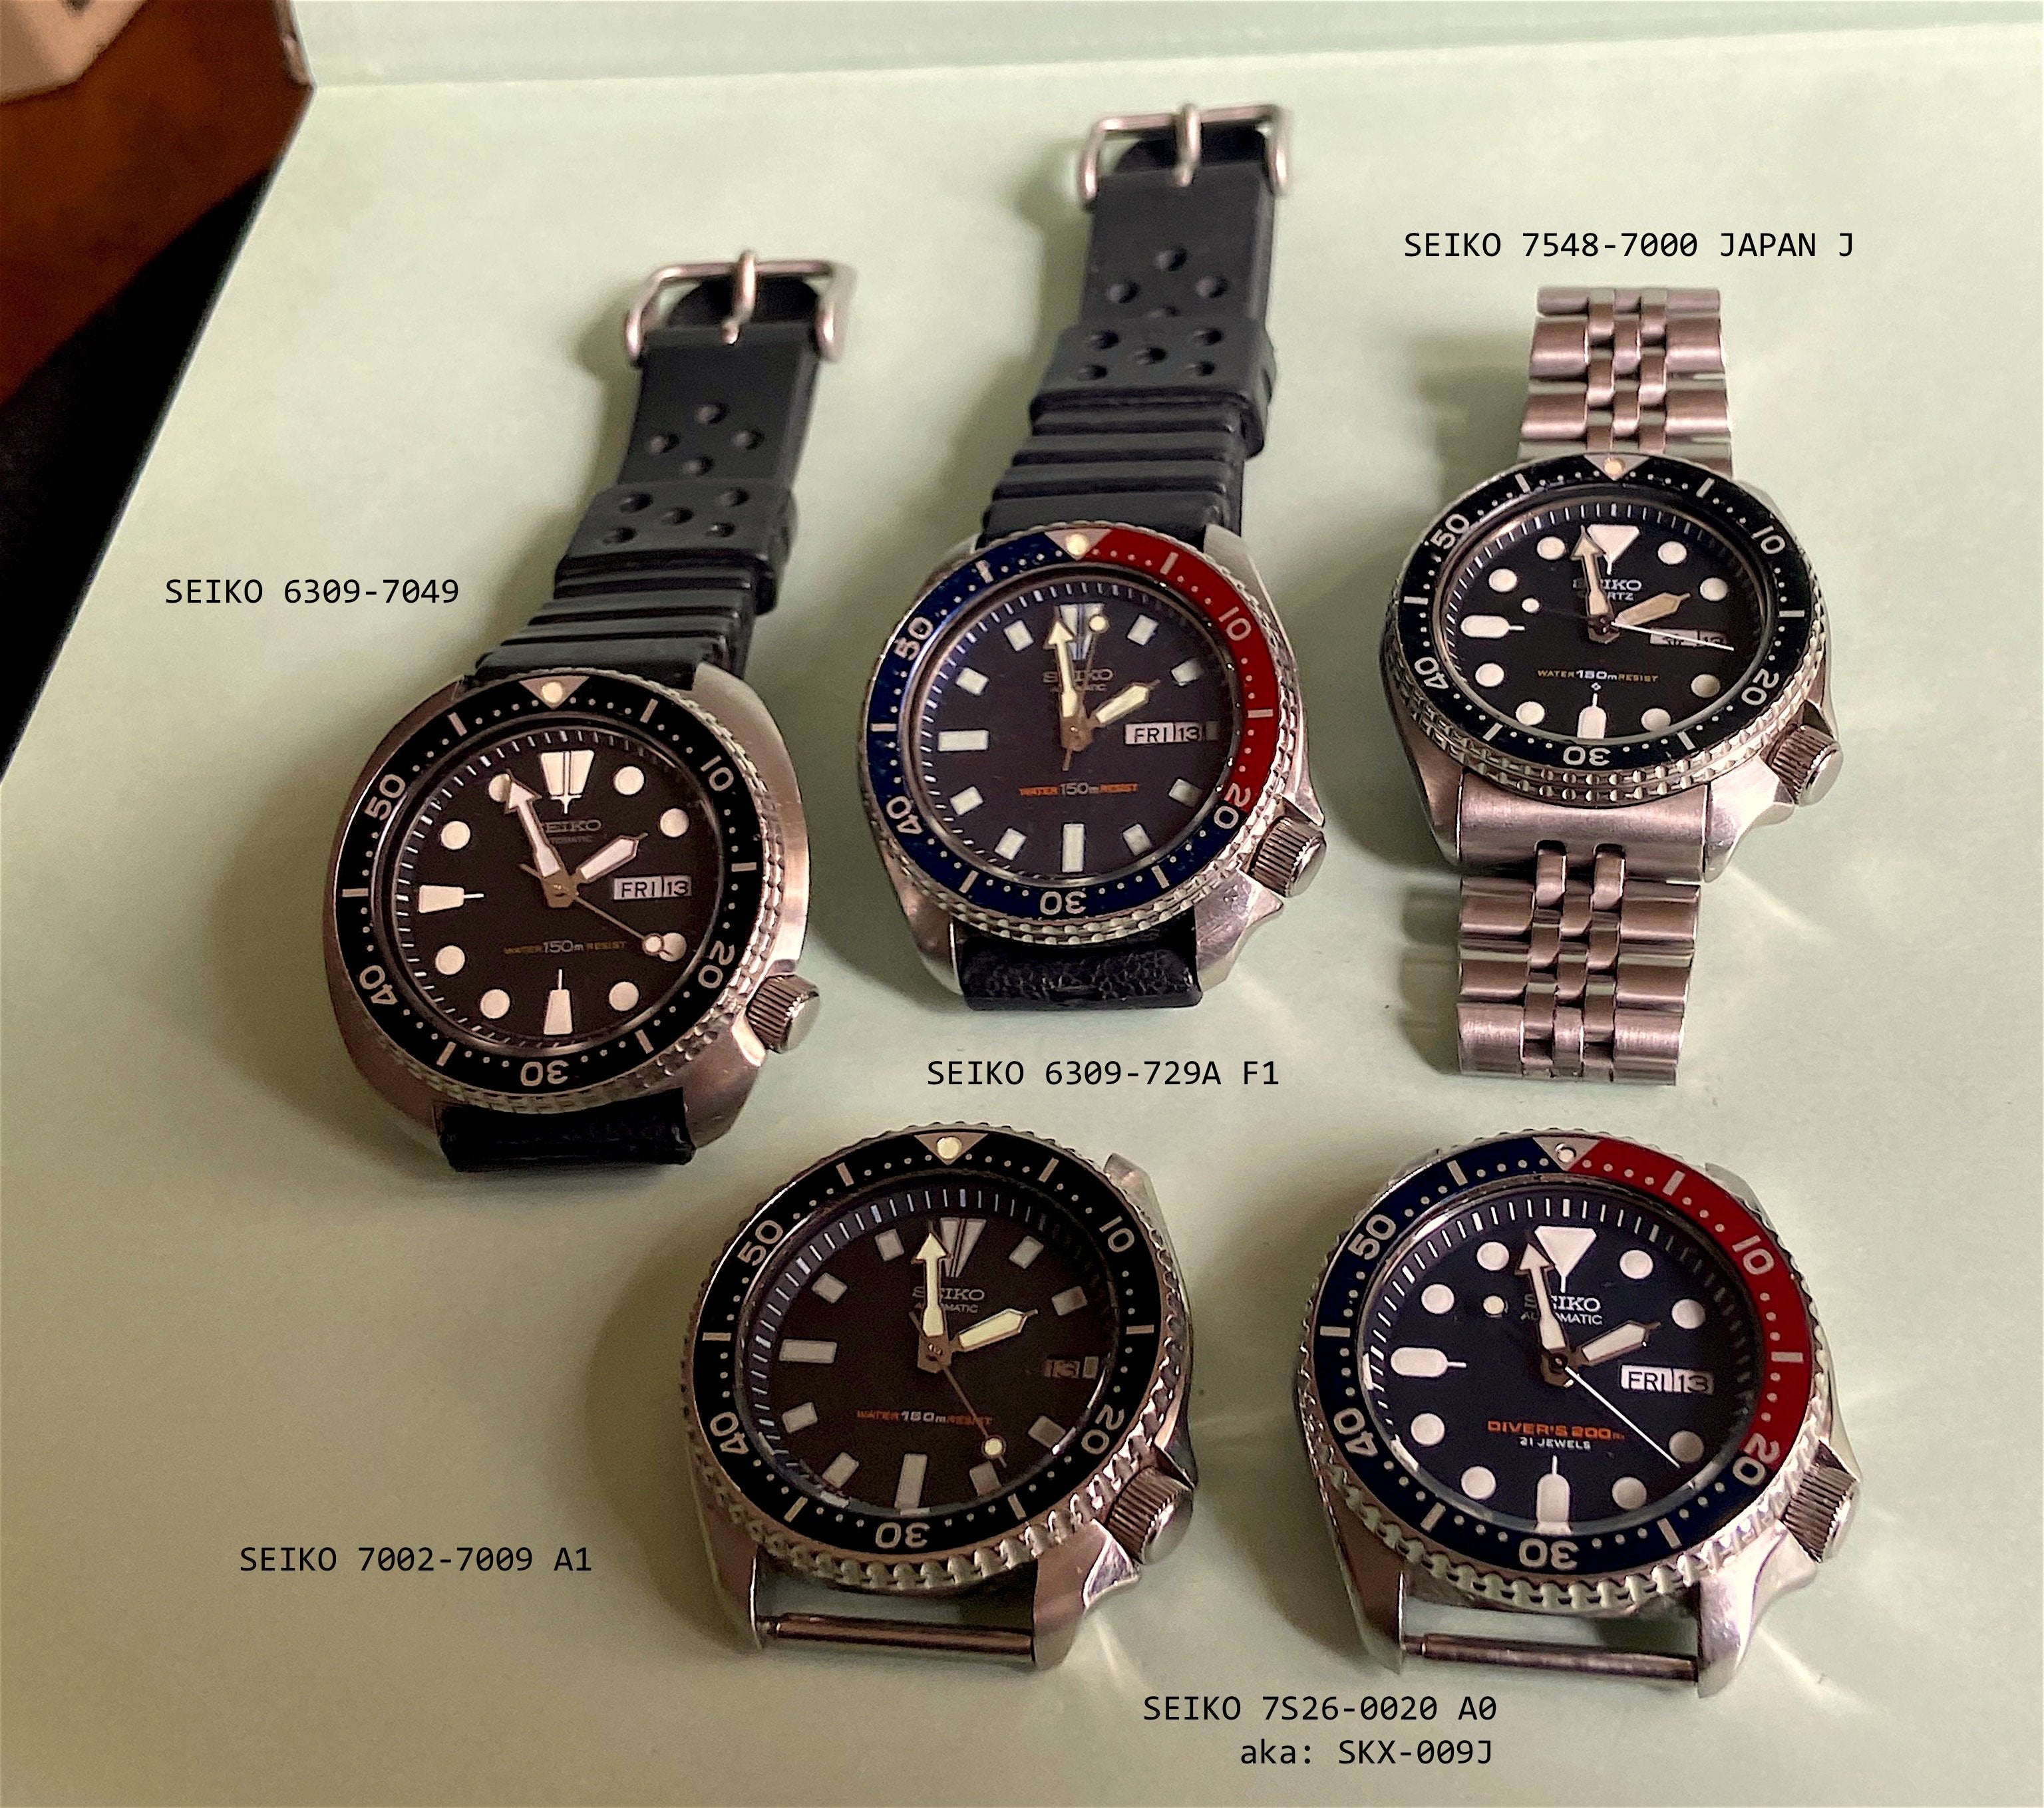 The 7002 case is like which SKX? | The Watch Site